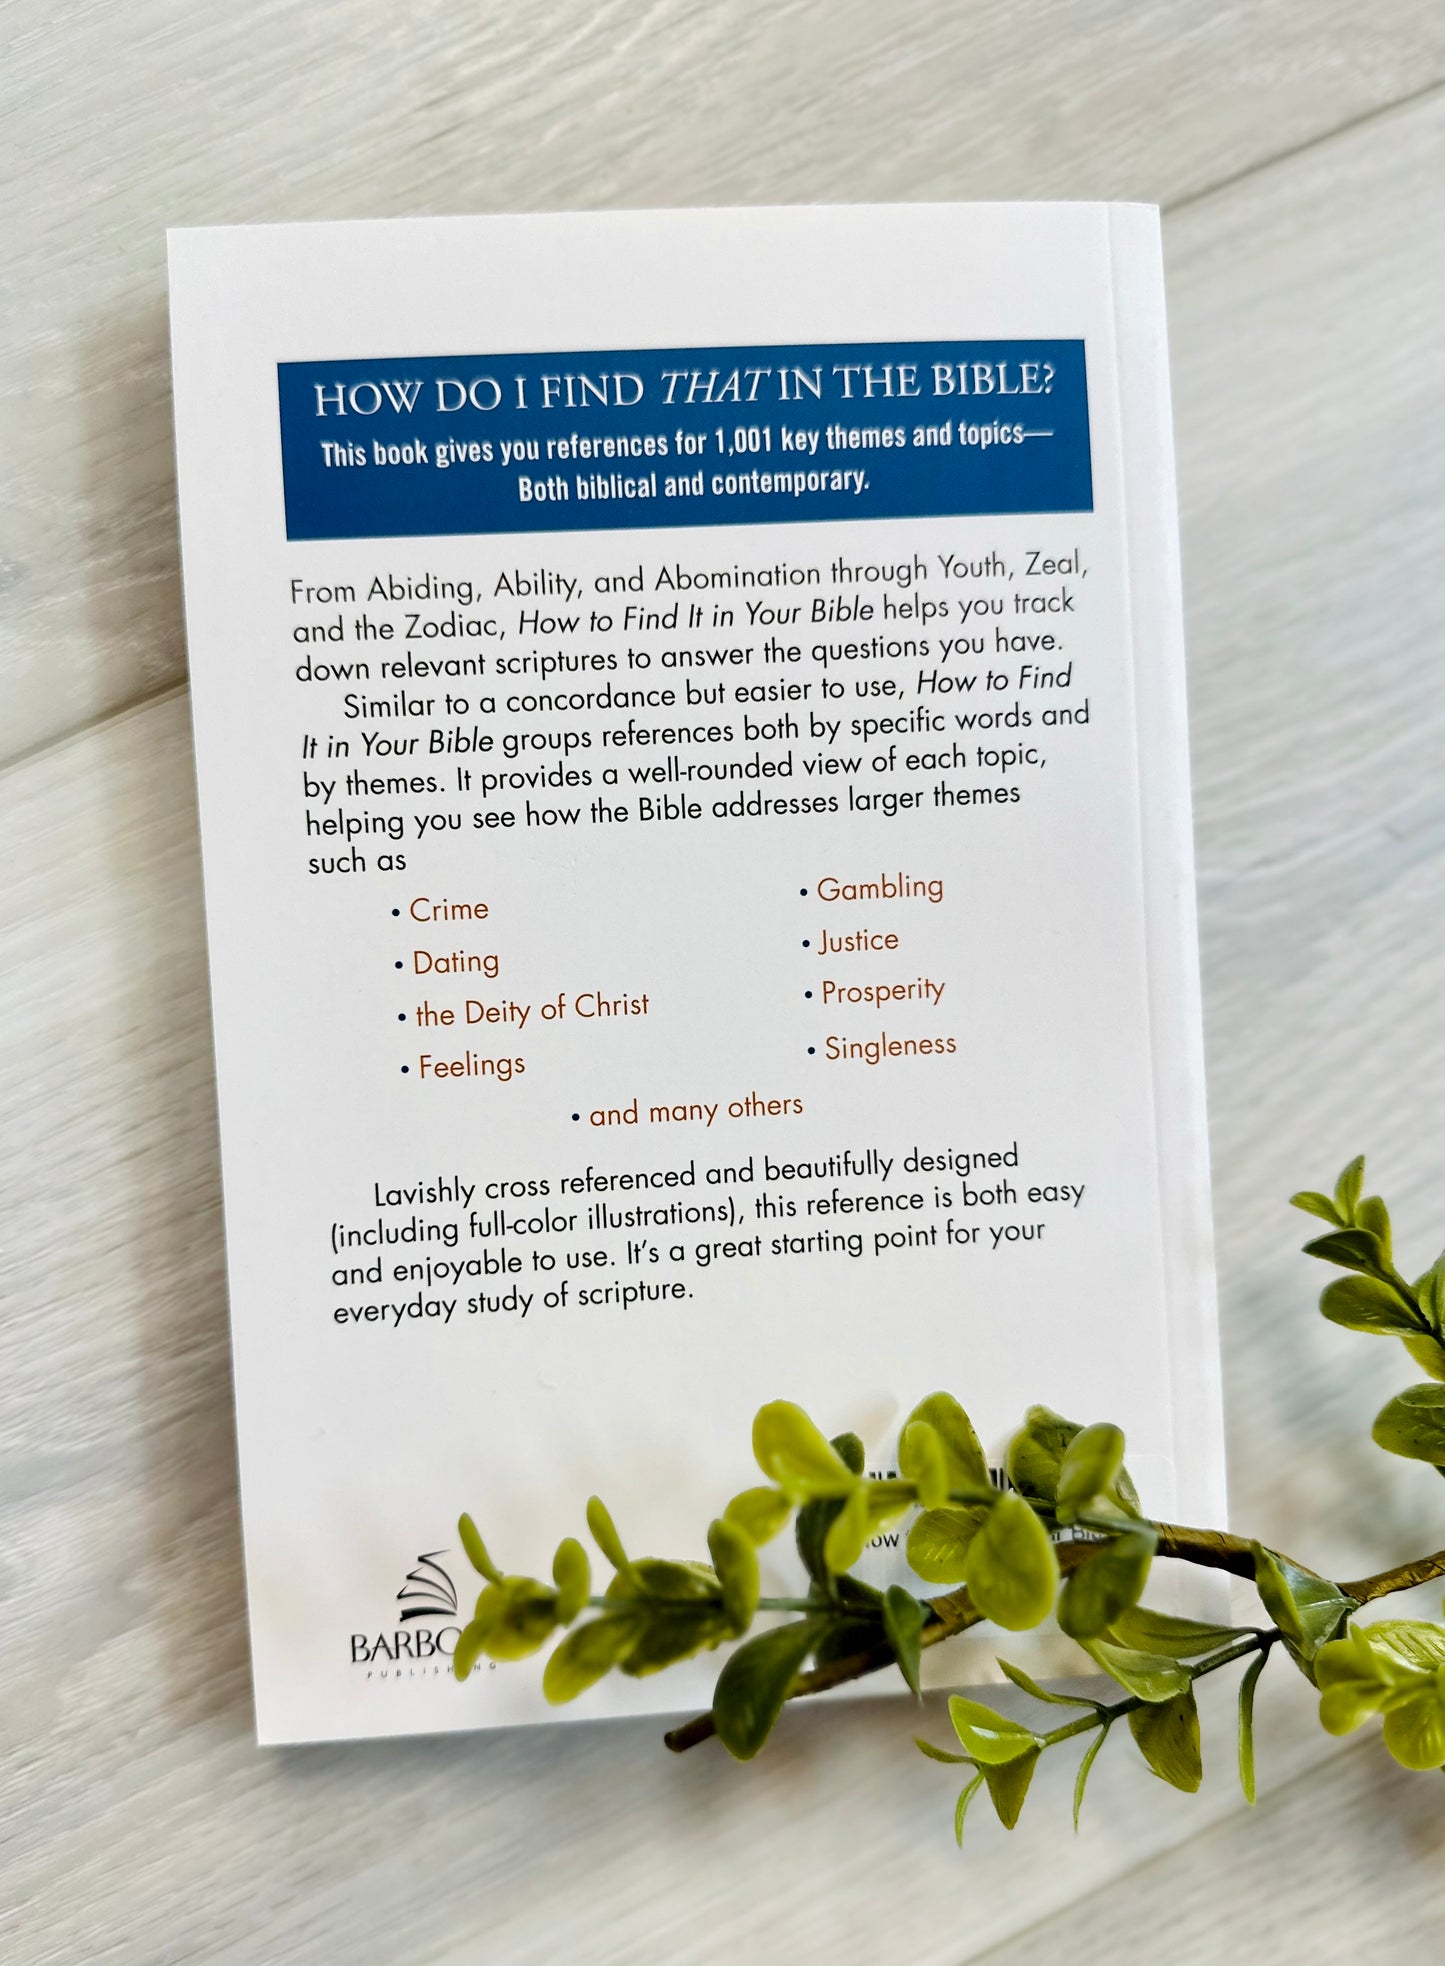 How to find it in your Bible